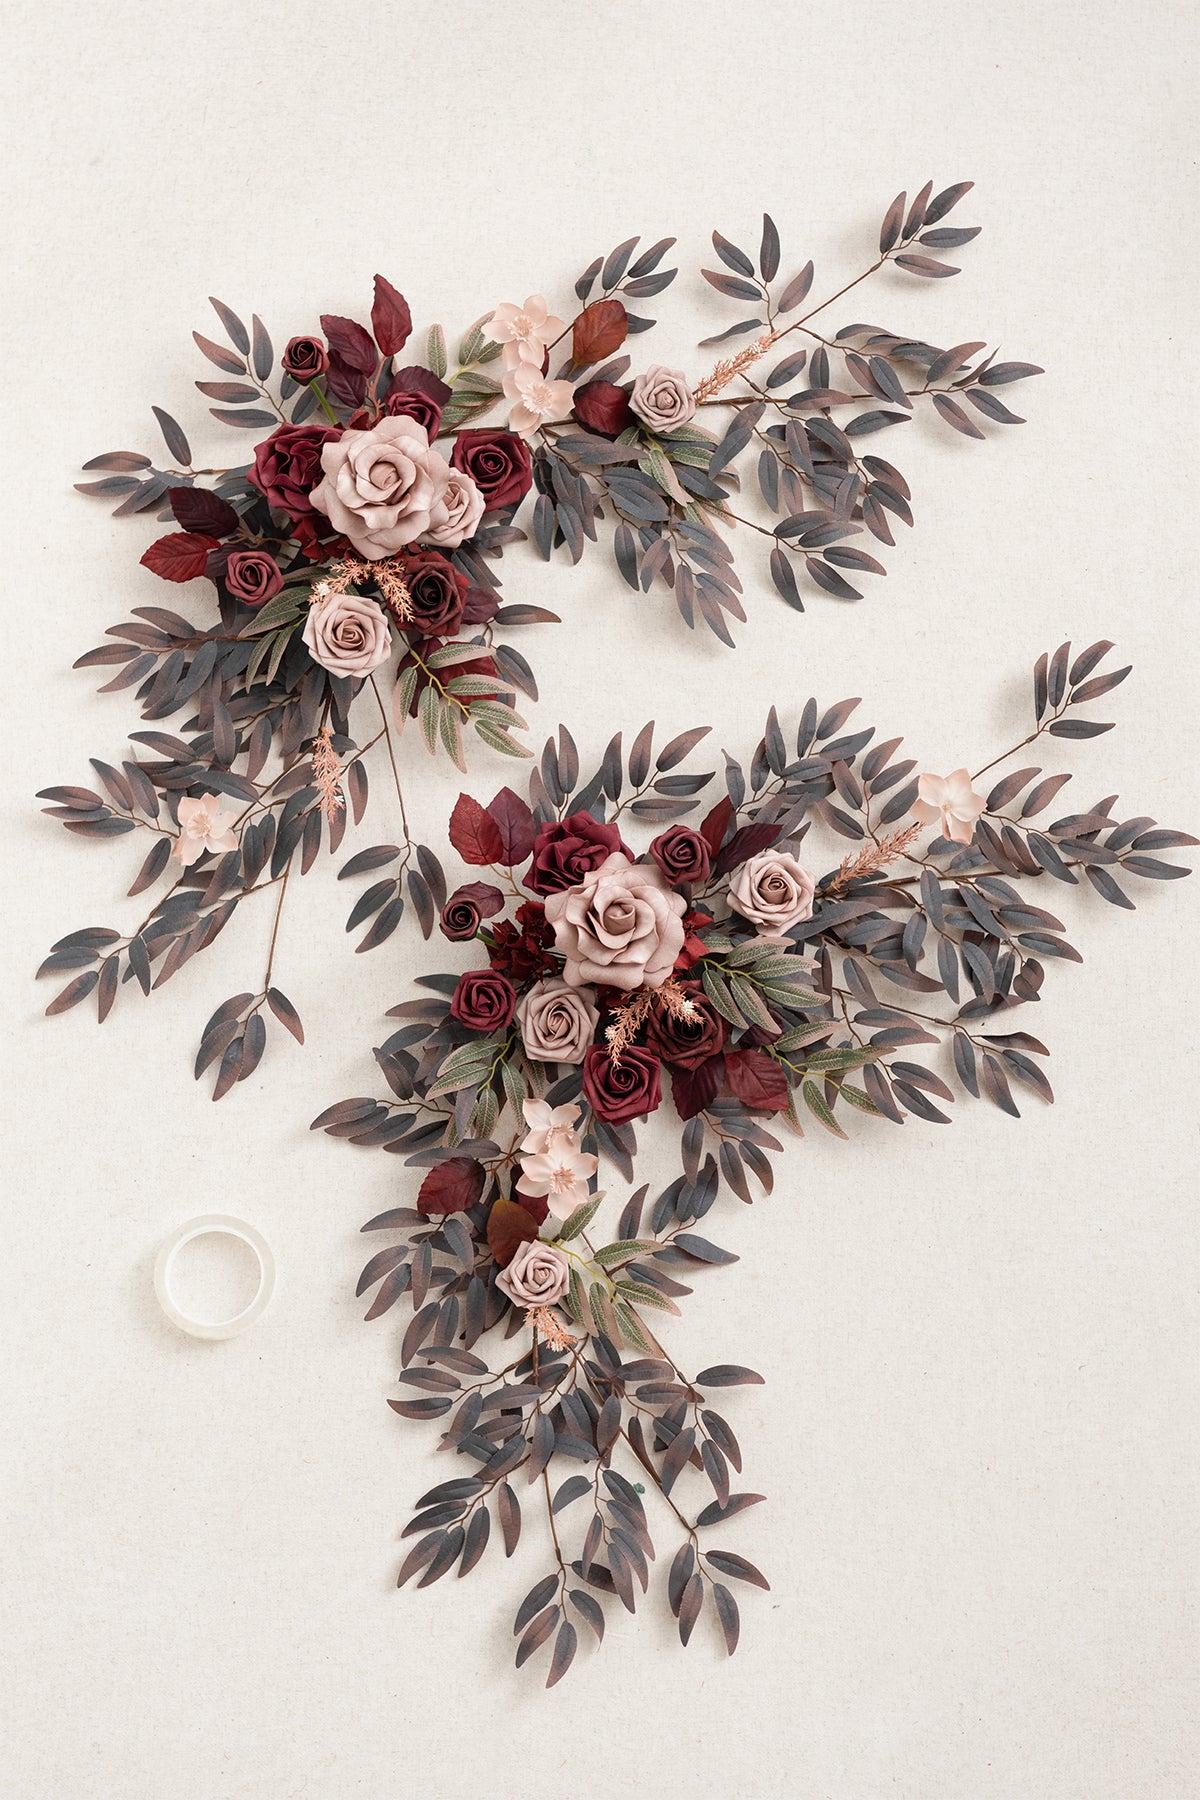 Sweetheart Table Floral Swags in Burgundy & Dusty Rose